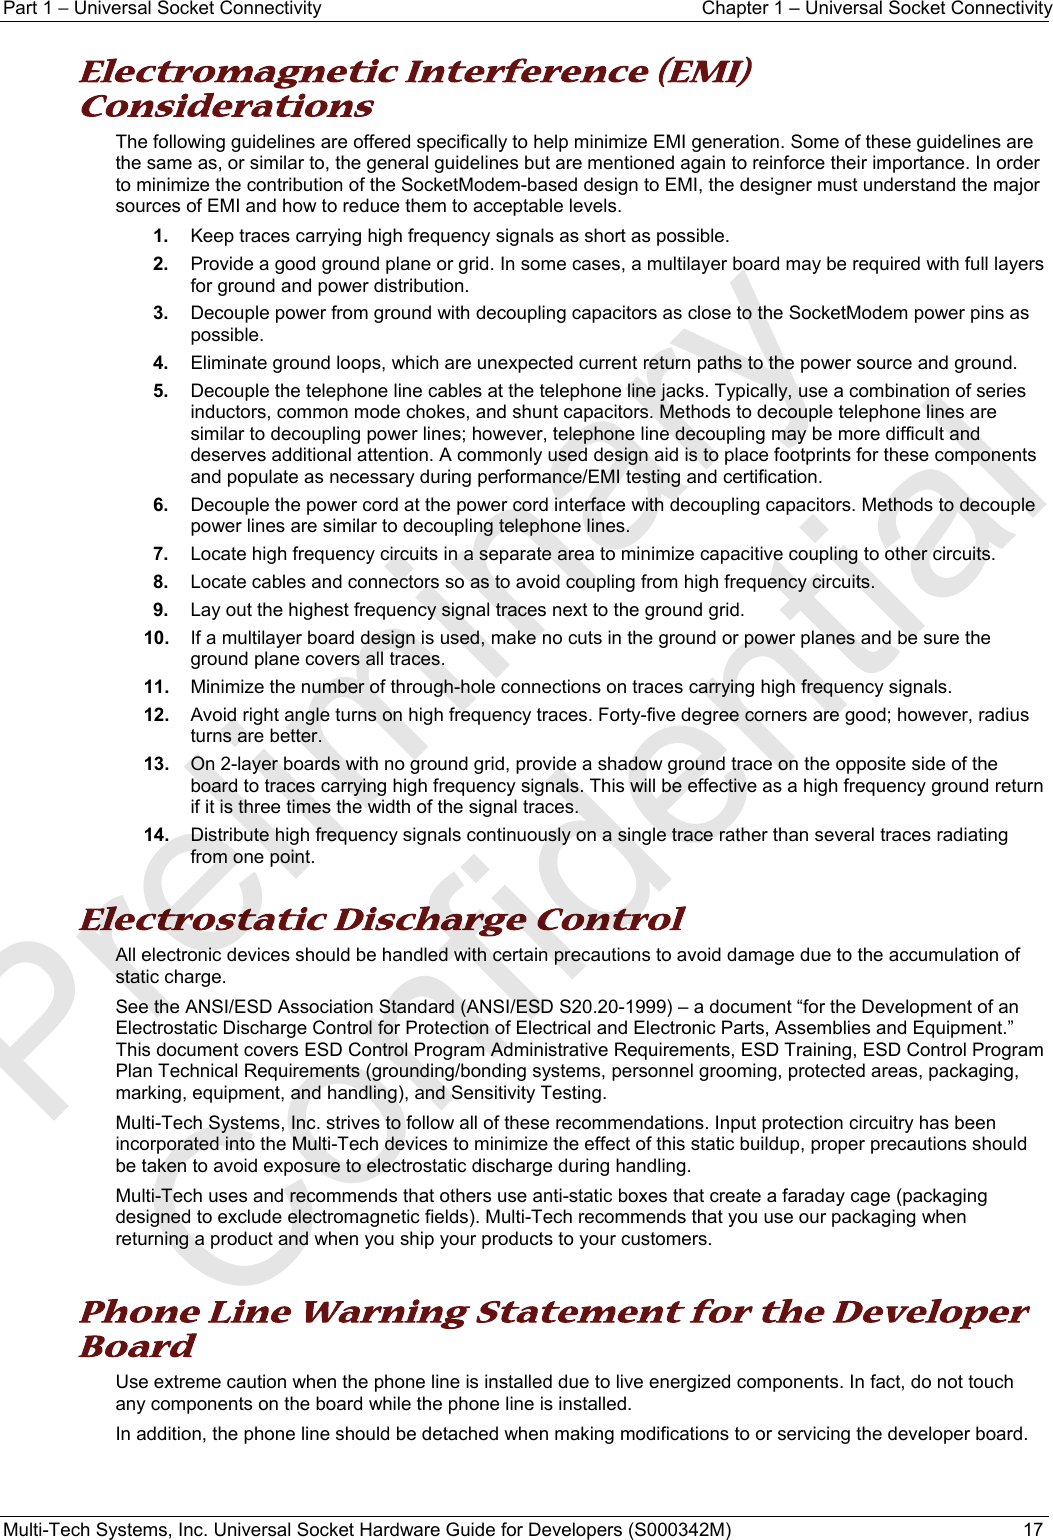 Part 1 − Universal Socket Connectivity  Chapter 1 – Universal Socket Connectivity Multi-Tech Systems, Inc. Universal Socket Hardware Guide for Developers (S000342M)  17  Electromagnetic Interference (EMI) Considerations The following guidelines are offered specifically to help minimize EMI generation. Some of these guidelines are the same as, or similar to, the general guidelines but are mentioned again to reinforce their importance. In order to minimize the contribution of the SocketModem-based design to EMI, the designer must understand the major sources of EMI and how to reduce them to acceptable levels.  1.  Keep traces carrying high frequency signals as short as possible. 2.  Provide a good ground plane or grid. In some cases, a multilayer board may be required with full layers for ground and power distribution. 3.  Decouple power from ground with decoupling capacitors as close to the SocketModem power pins as possible. 4.  Eliminate ground loops, which are unexpected current return paths to the power source and ground. 5.  Decouple the telephone line cables at the telephone line jacks. Typically, use a combination of series inductors, common mode chokes, and shunt capacitors. Methods to decouple telephone lines are similar to decoupling power lines; however, telephone line decoupling may be more difficult and deserves additional attention. A commonly used design aid is to place footprints for these components and populate as necessary during performance/EMI testing and certification. 6.  Decouple the power cord at the power cord interface with decoupling capacitors. Methods to decouple power lines are similar to decoupling telephone lines. 7.  Locate high frequency circuits in a separate area to minimize capacitive coupling to other circuits. 8.  Locate cables and connectors so as to avoid coupling from high frequency circuits. 9.  Lay out the highest frequency signal traces next to the ground grid. 10.  If a multilayer board design is used, make no cuts in the ground or power planes and be sure the ground plane covers all traces. 11.  Minimize the number of through-hole connections on traces carrying high frequency signals. 12.  Avoid right angle turns on high frequency traces. Forty-five degree corners are good; however, radius turns are better. 13.  On 2-layer boards with no ground grid, provide a shadow ground trace on the opposite side of the board to traces carrying high frequency signals. This will be effective as a high frequency ground return if it is three times the width of the signal traces. 14.  Distribute high frequency signals continuously on a single trace rather than several traces radiating from one point.  Electrostatic Discharge Control All electronic devices should be handled with certain precautions to avoid damage due to the accumulation of static charge.  See the ANSI/ESD Association Standard (ANSI/ESD S20.20-1999) – a document “for the Development of an Electrostatic Discharge Control for Protection of Electrical and Electronic Parts, Assemblies and Equipment.” This document covers ESD Control Program Administrative Requirements, ESD Training, ESD Control Program Plan Technical Requirements (grounding/bonding systems, personnel grooming, protected areas, packaging, marking, equipment, and handling), and Sensitivity Testing. Multi-Tech Systems, Inc. strives to follow all of these recommendations. Input protection circuitry has been incorporated into the Multi-Tech devices to minimize the effect of this static buildup, proper precautions should be taken to avoid exposure to electrostatic discharge during handling.  Multi-Tech uses and recommends that others use anti-static boxes that create a faraday cage (packaging designed to exclude electromagnetic fields). Multi-Tech recommends that you use our packaging when returning a product and when you ship your products to your customers.  Phone Line Warning Statement for the Developer Board Use extreme caution when the phone line is installed due to live energized components. In fact, do not touch any components on the board while the phone line is installed.  In addition, the phone line should be detached when making modifications to or servicing the developer board.   Preliminary  Confidential